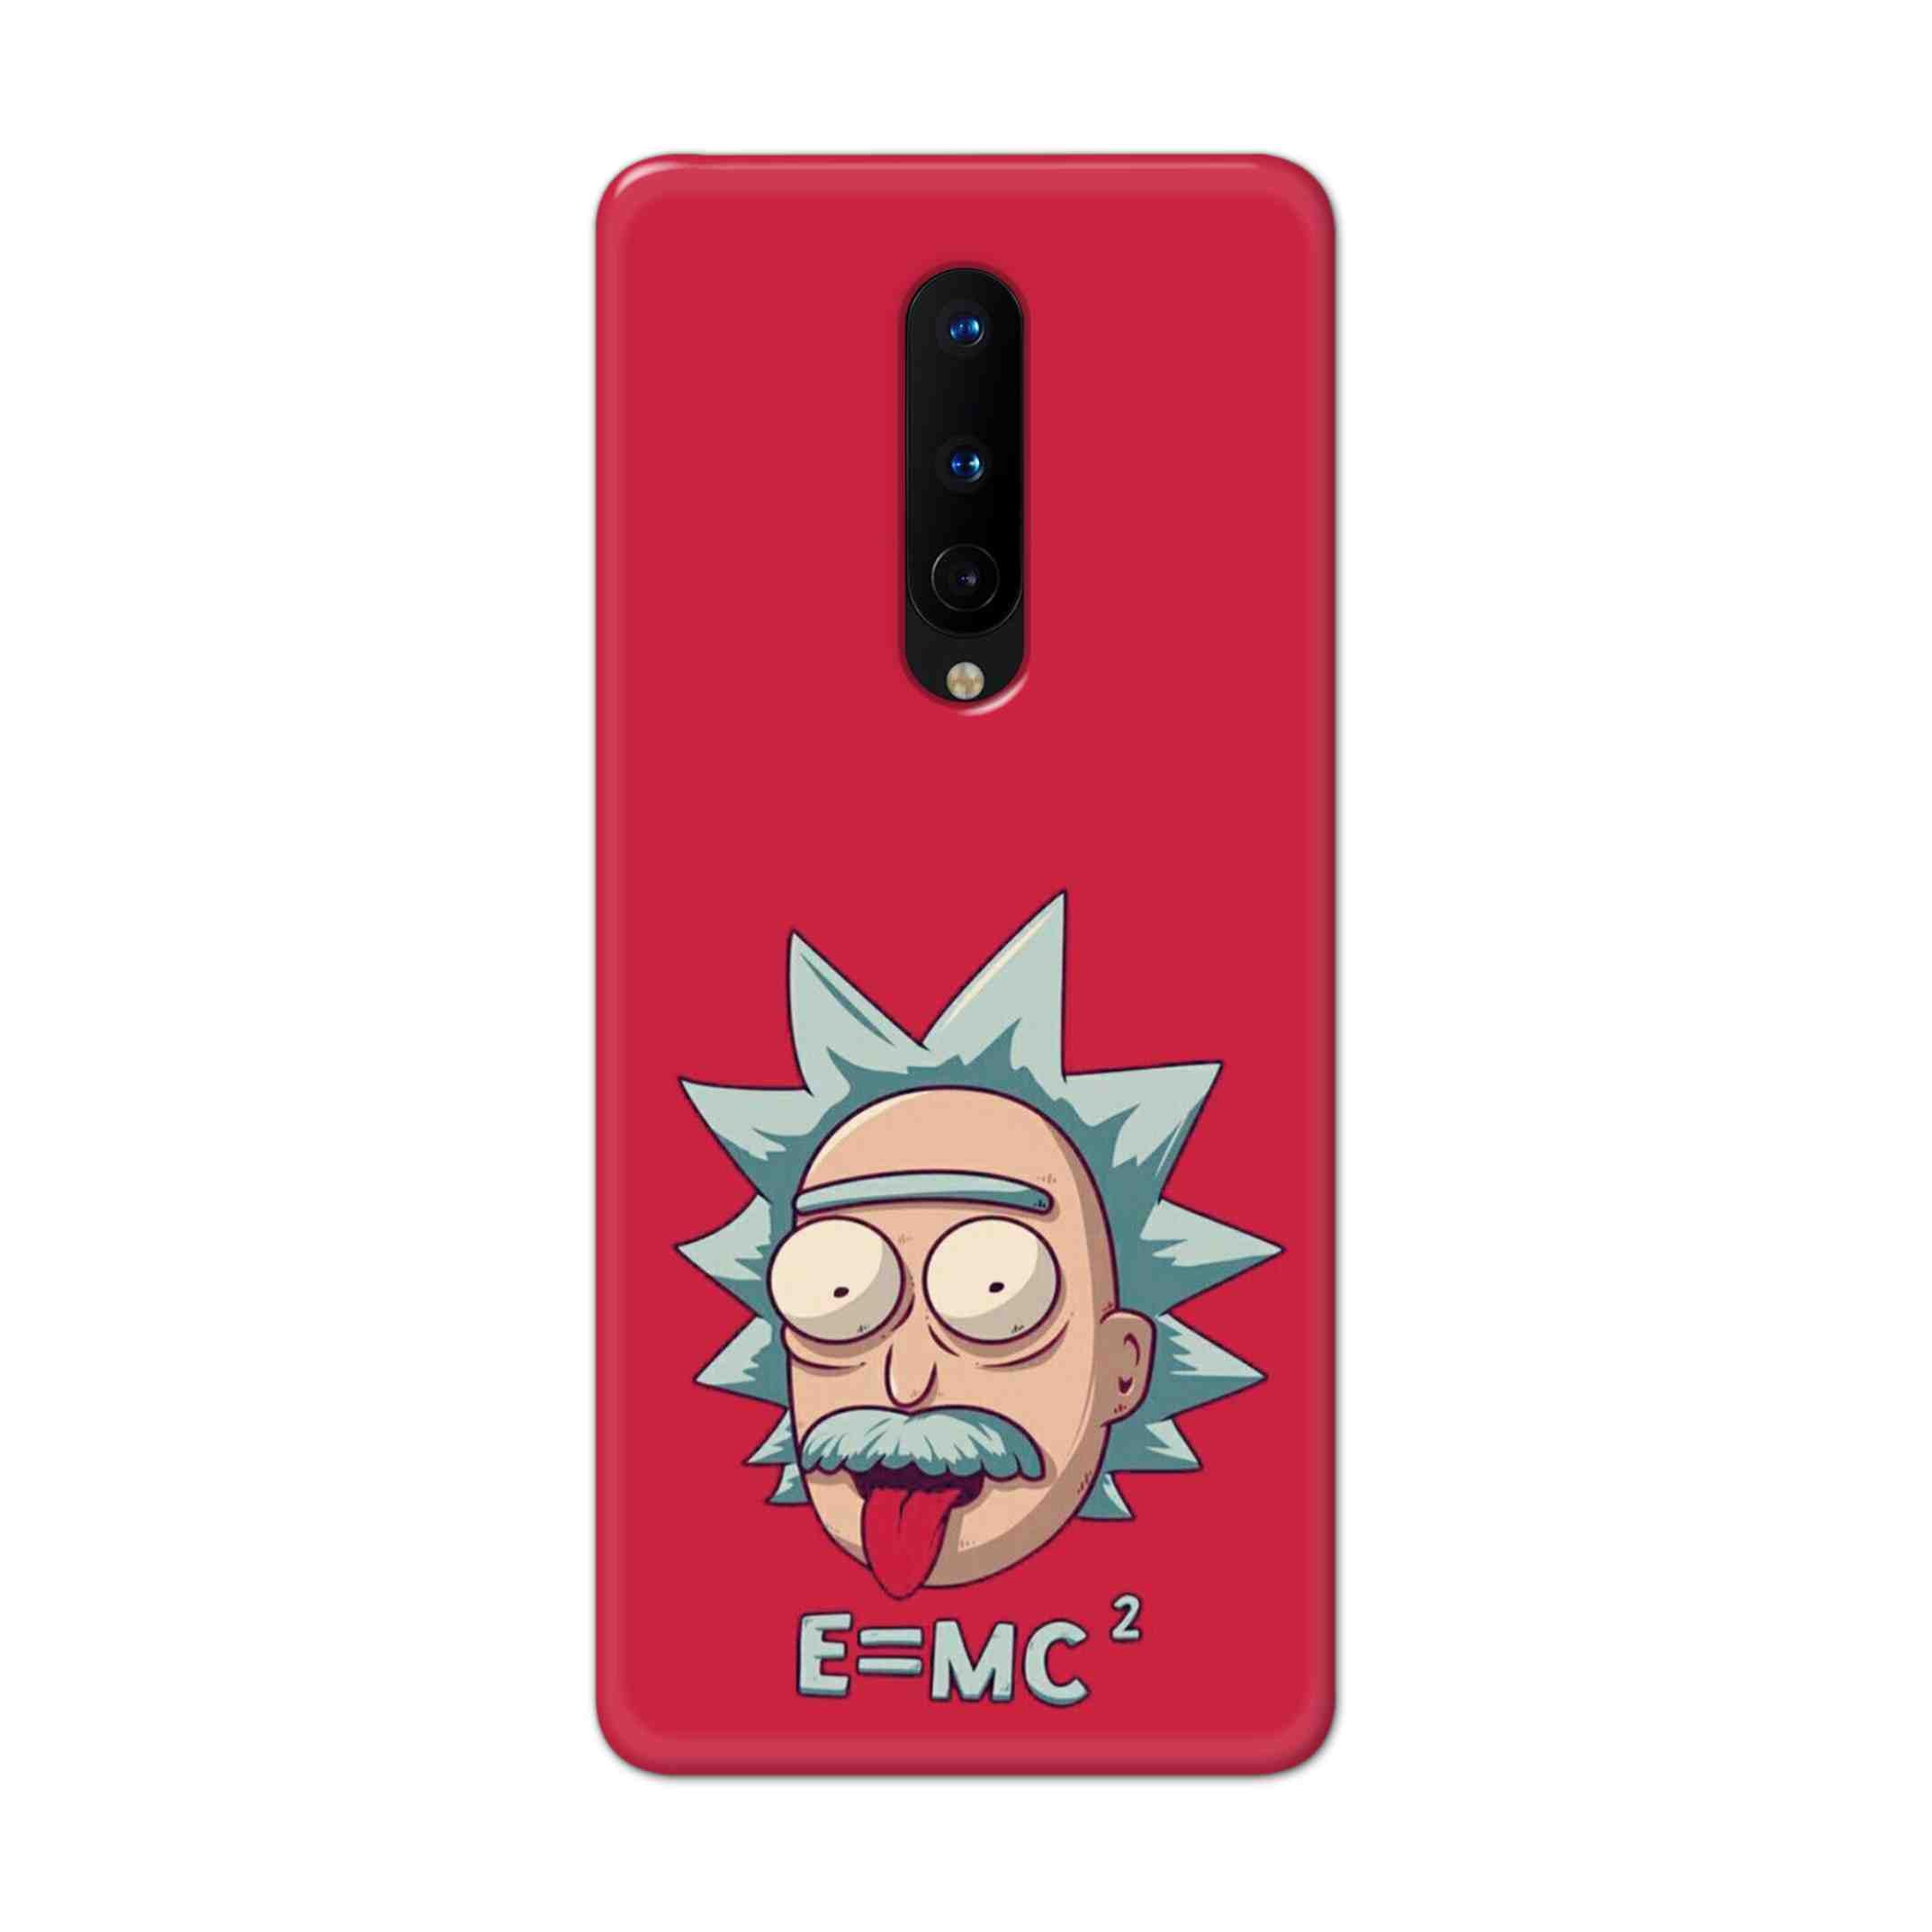 Buy E=Mc Hard Back Mobile Phone Case Cover For OnePlus 8 Online